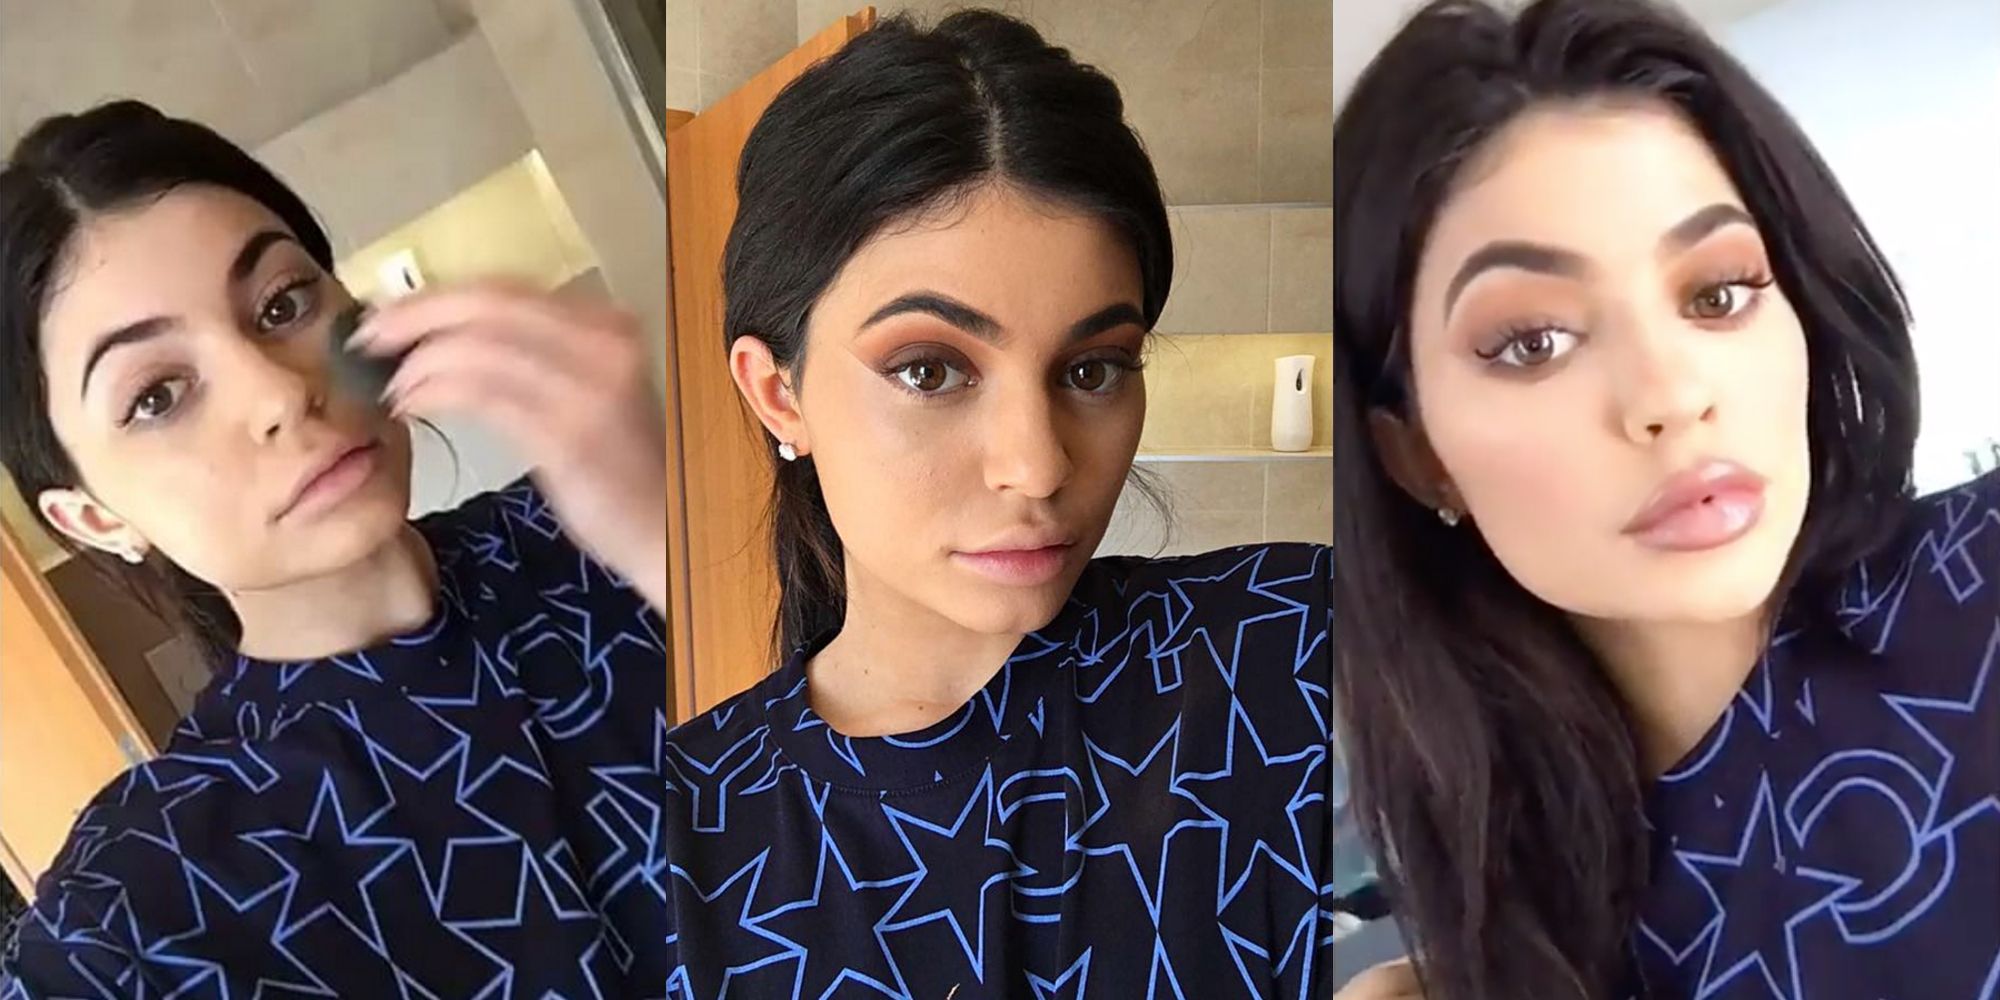 How to Get Kylie Jenner's Makeup - Kylie Jenner Beauty Routine